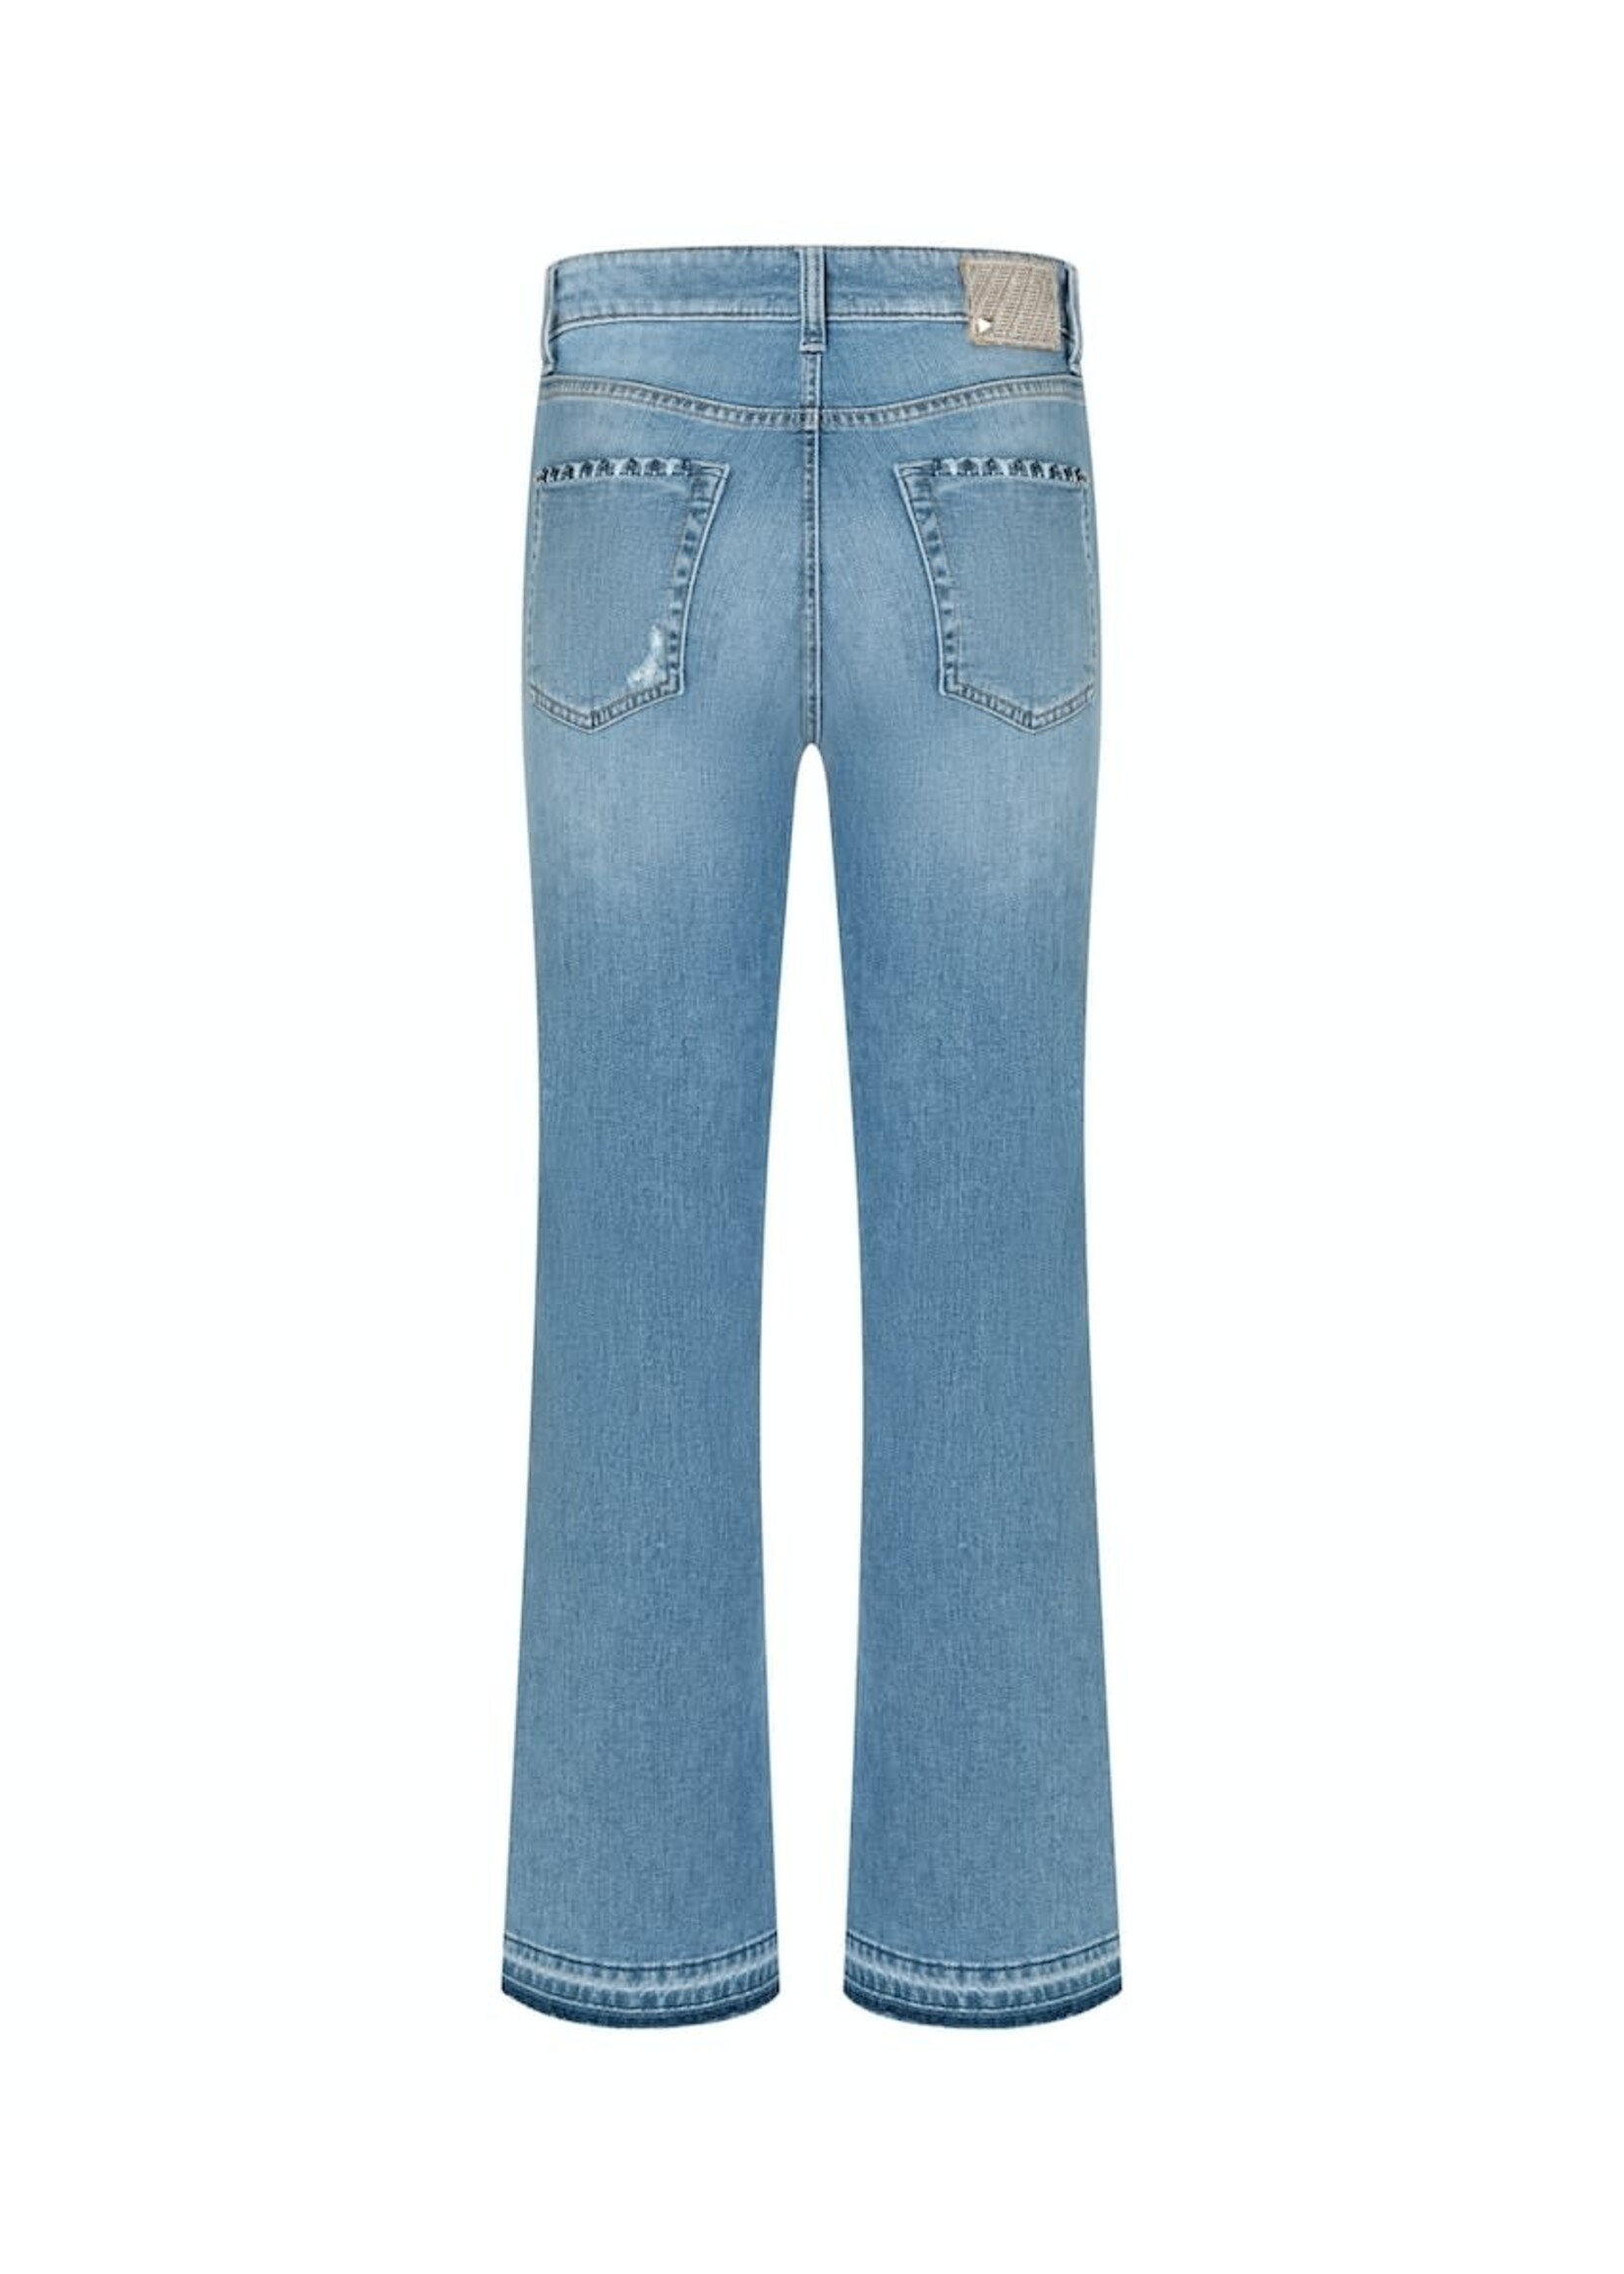 Cambio Cambio, Paris flared Damen lang Jeans, Sustainable Hanf Blue Denim, Size: